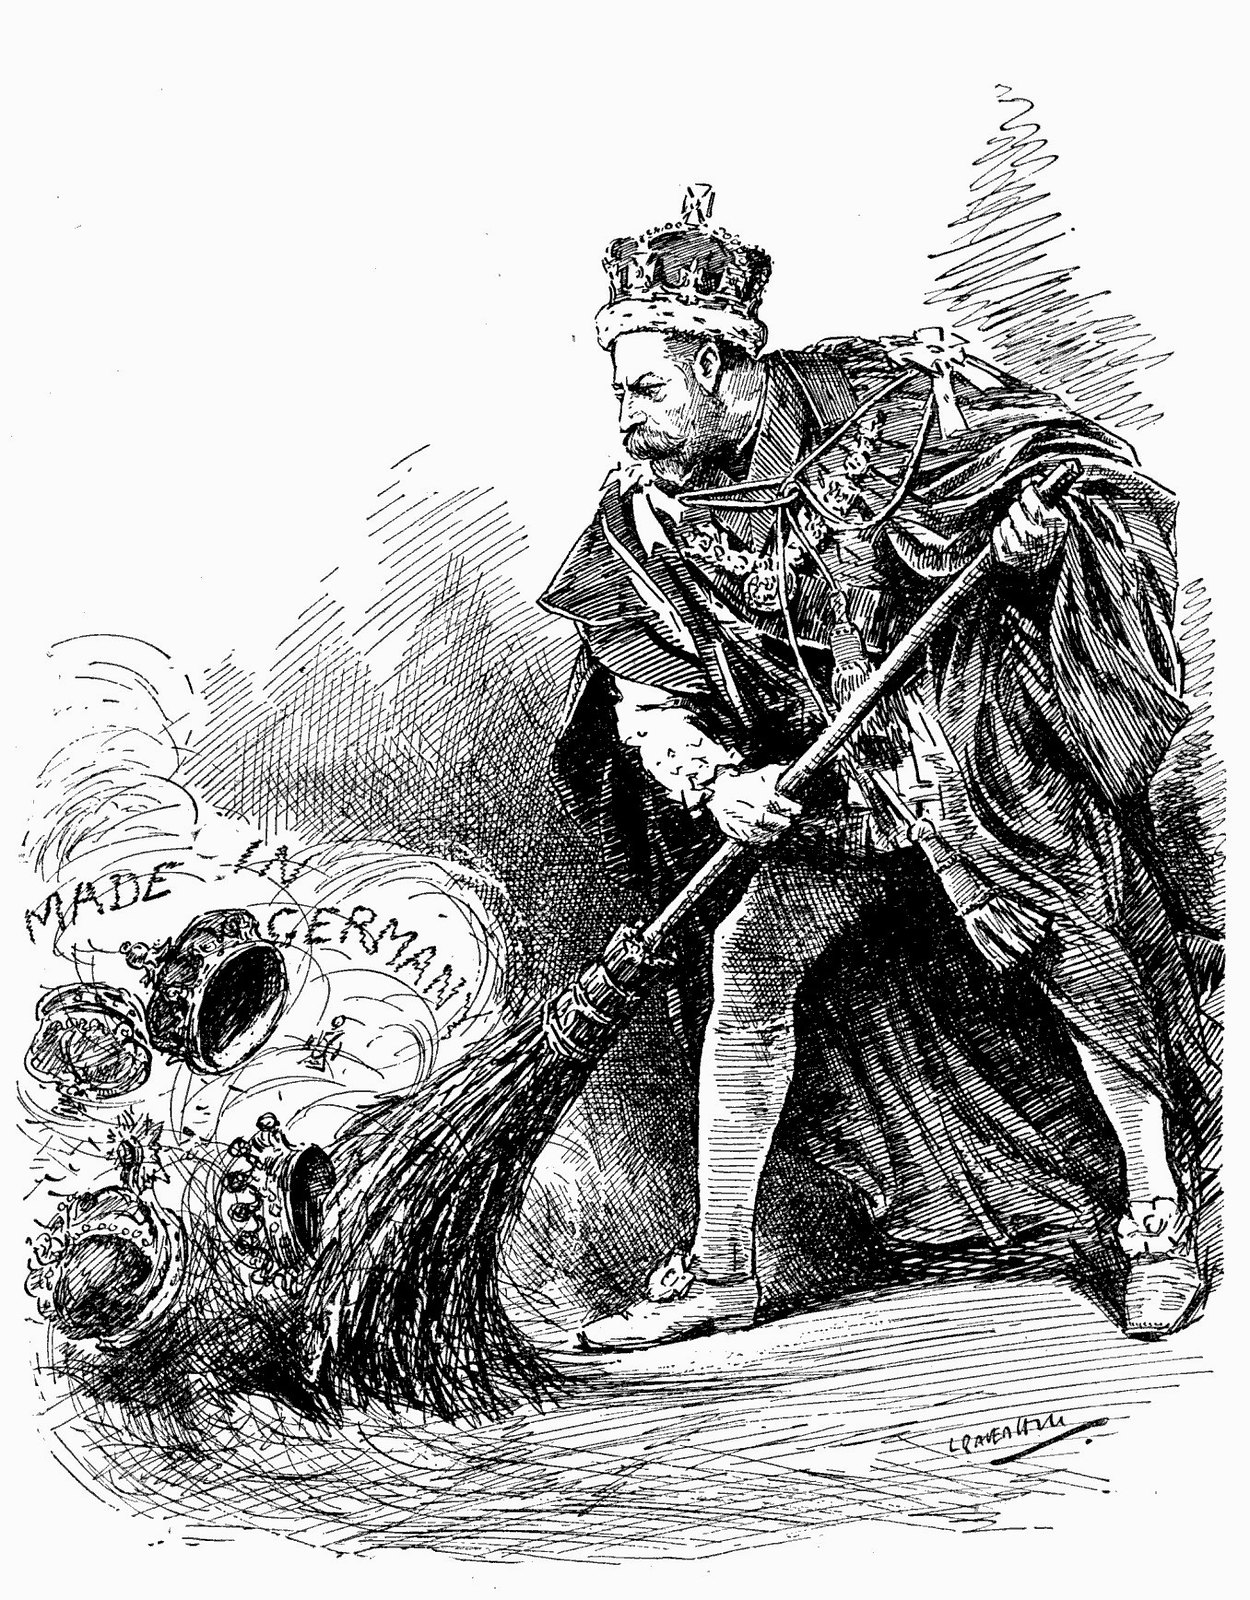 'A good riddance' A 1917 Punch cartoon depicts King George sweeping away his German titles